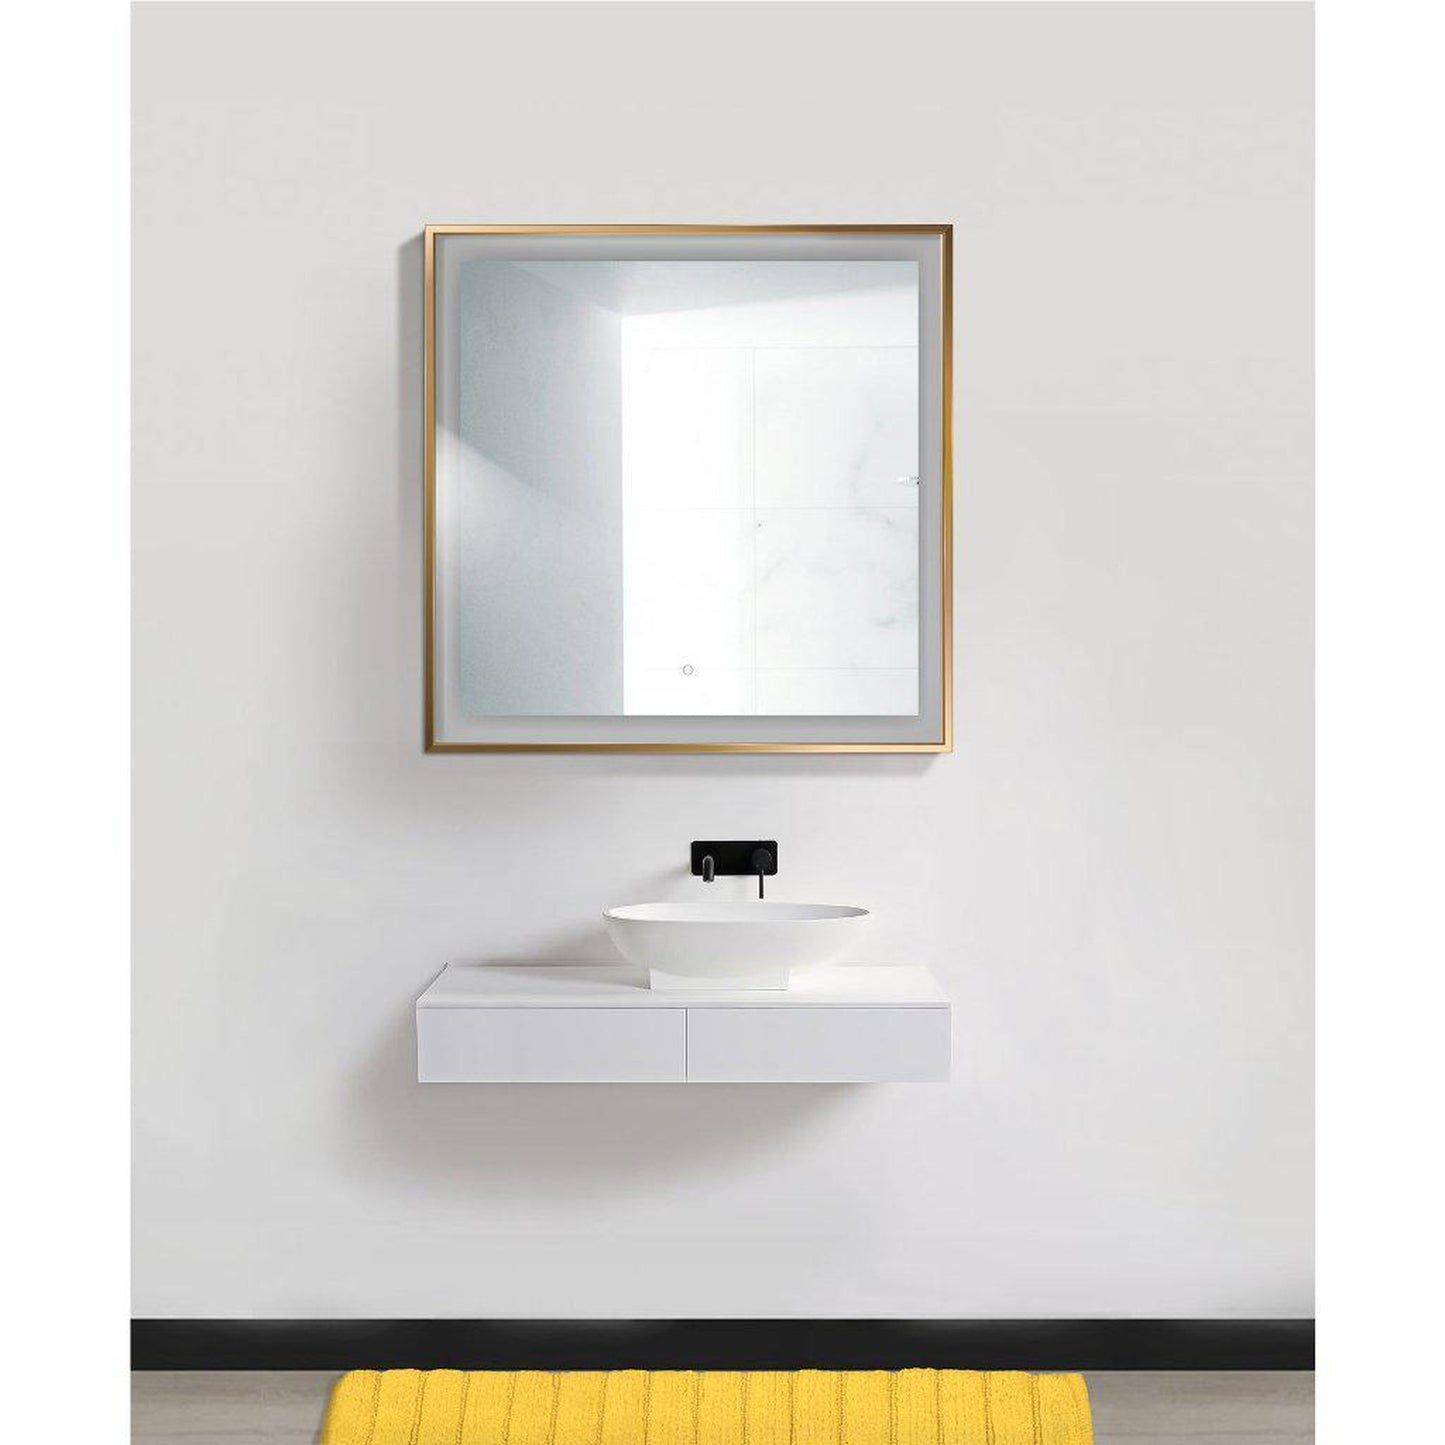 Krugg Reflections Soho 36" x 36" 5000K Square Matte Gold Wall-Mounted Framed LED Bathroom Vanity Mirror With Built-in Defogger and Dimmer